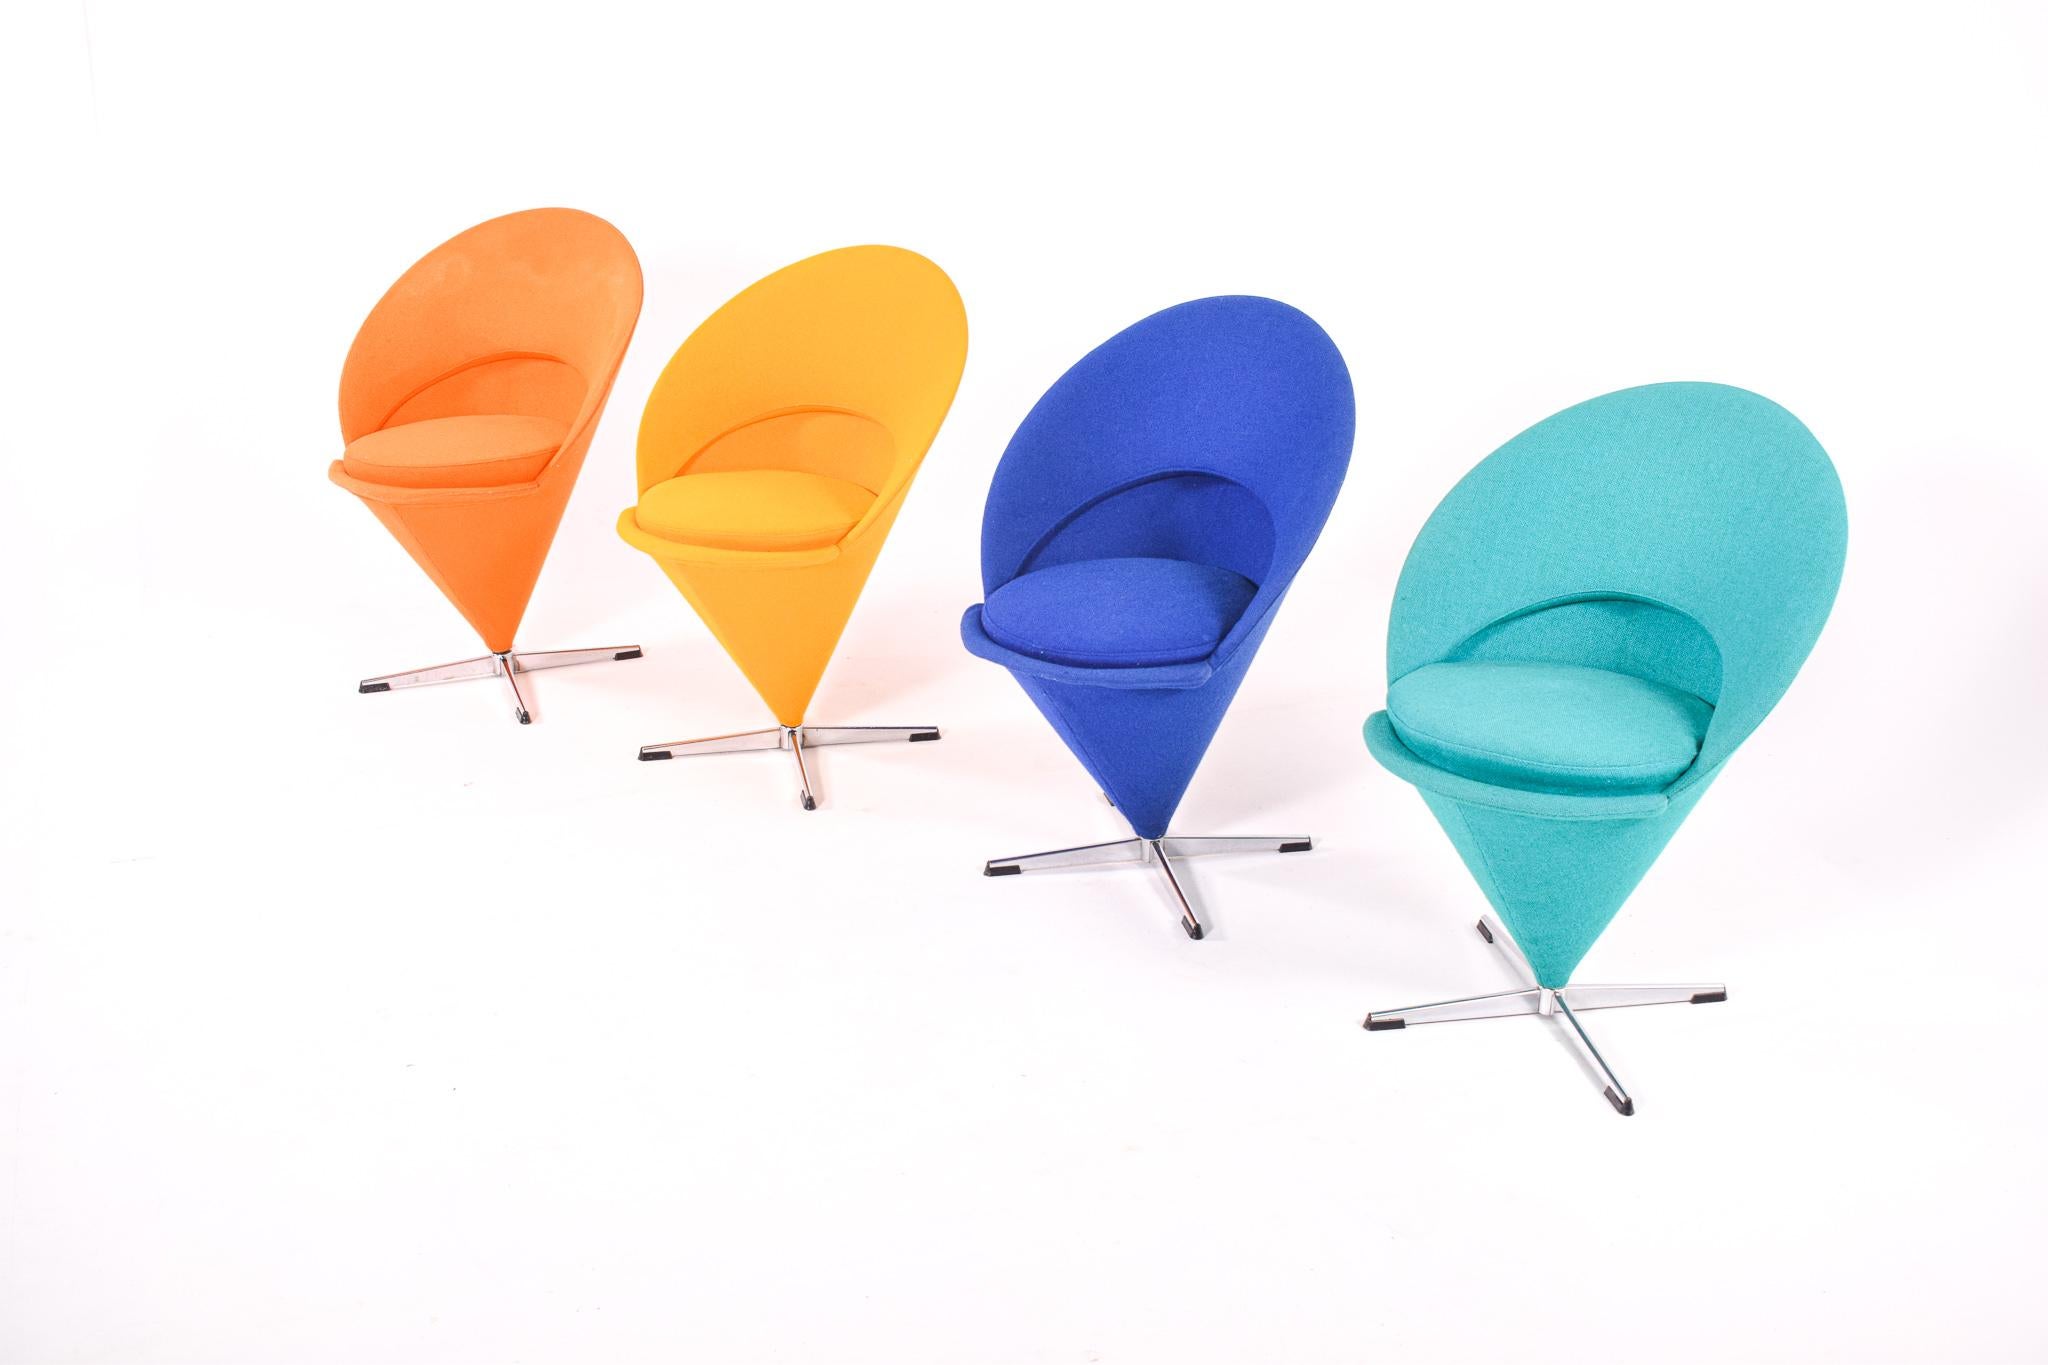 An iconic set of four cone chairs by Verner Panton. The pieces have chrome plated metal bases and are upholstered in blue, green, yellow and orange fabric. Comfortable as side chair or dining chair. Removable seat cushion. Original fabric. Verner